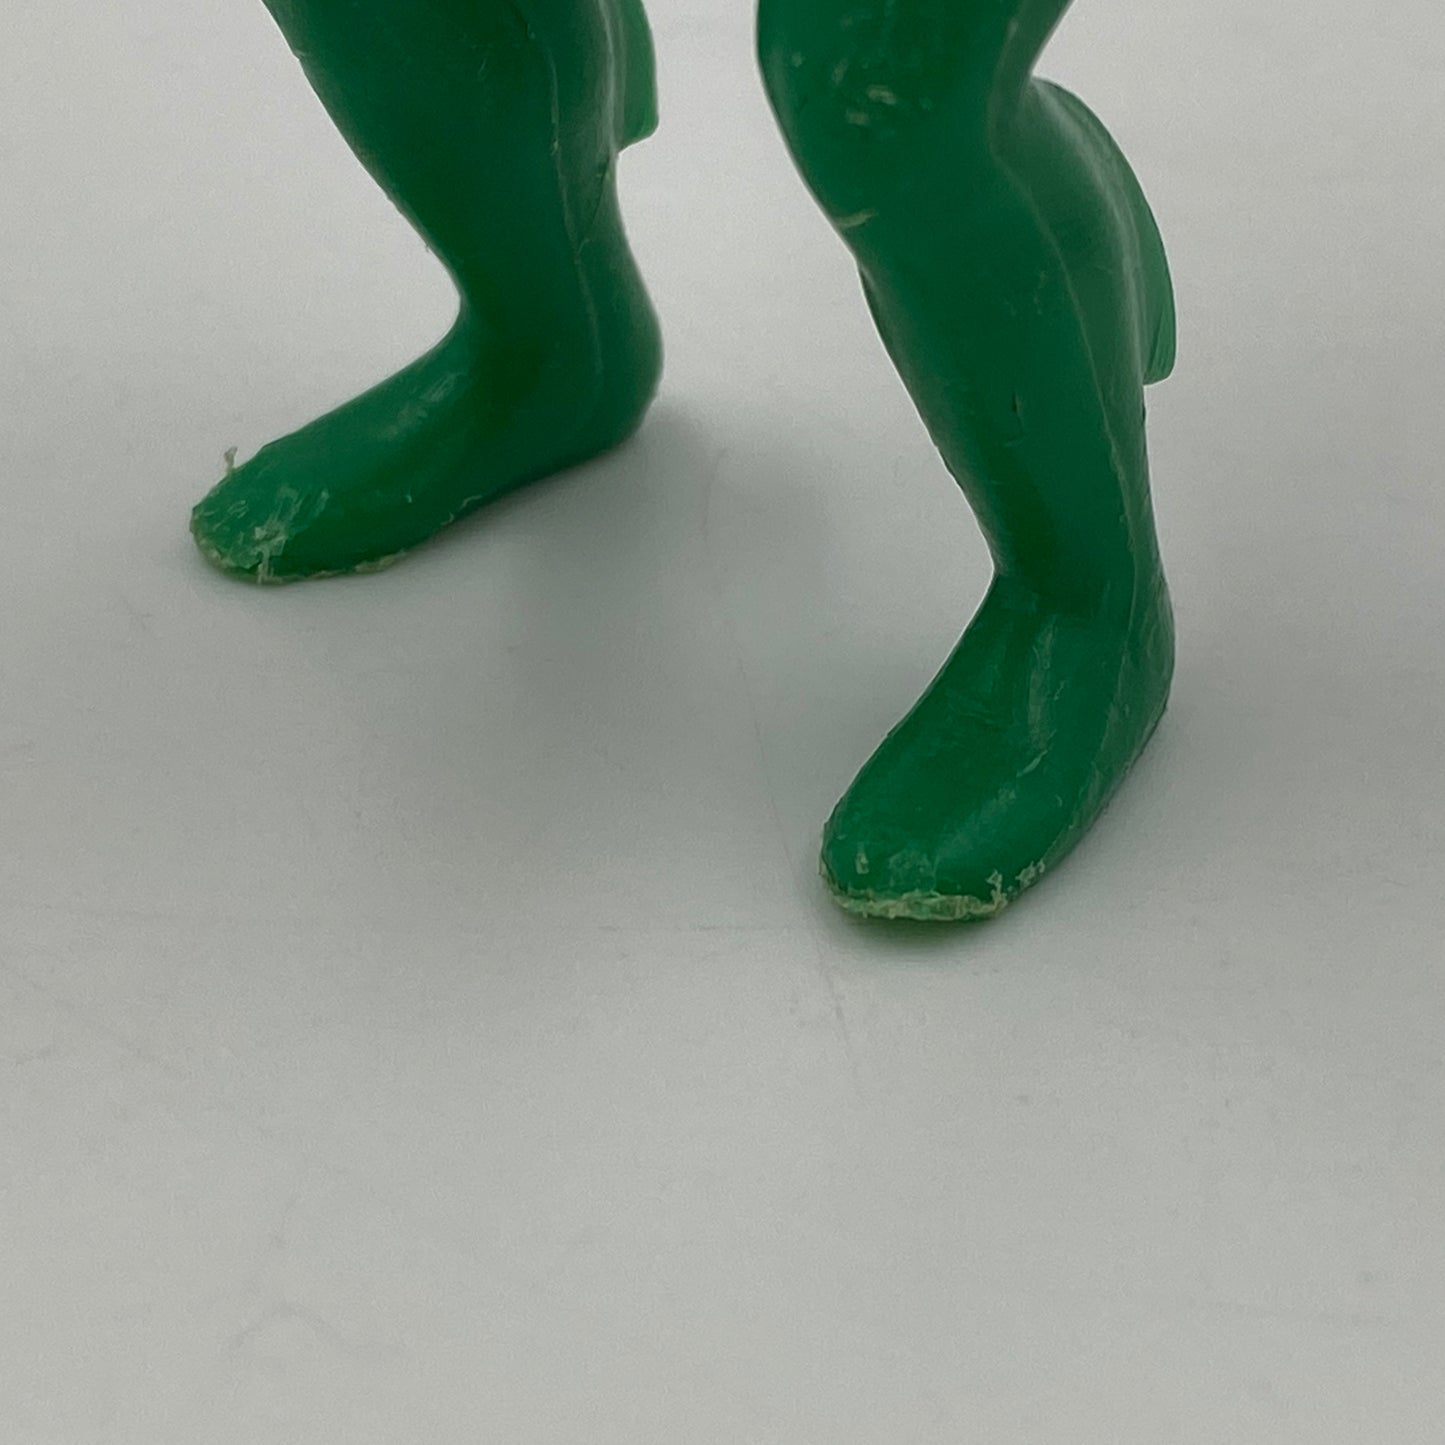 Comic Action Heroes Aquaman 3.75"  loose action figure (1976) Mego